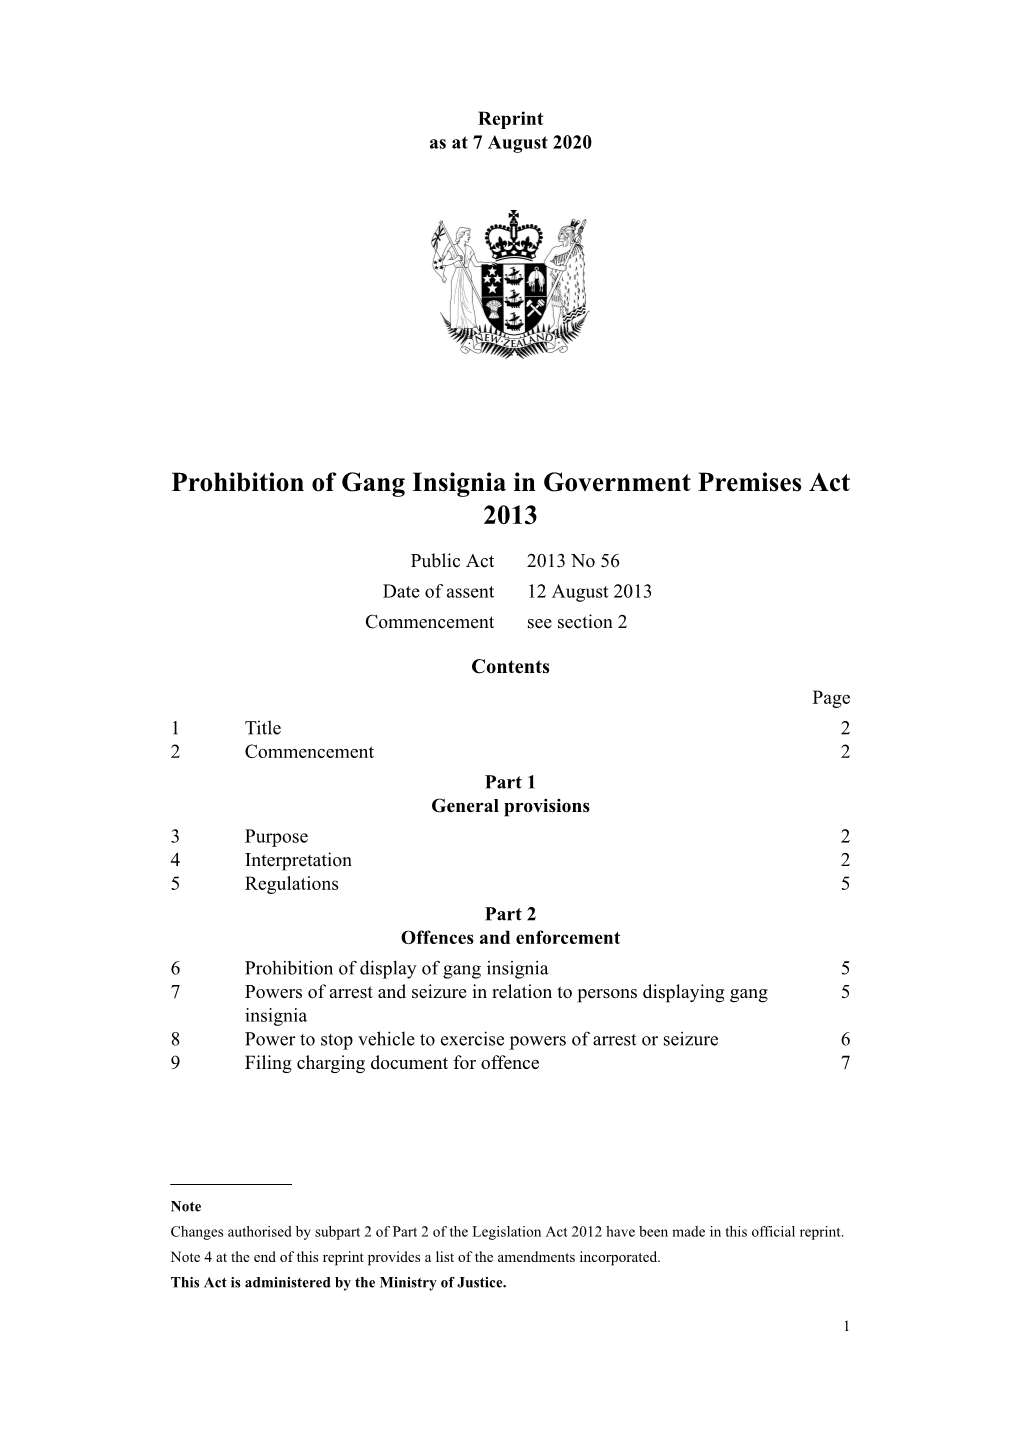 Prohibition of Gang Insignia in Government Premises Act 2013